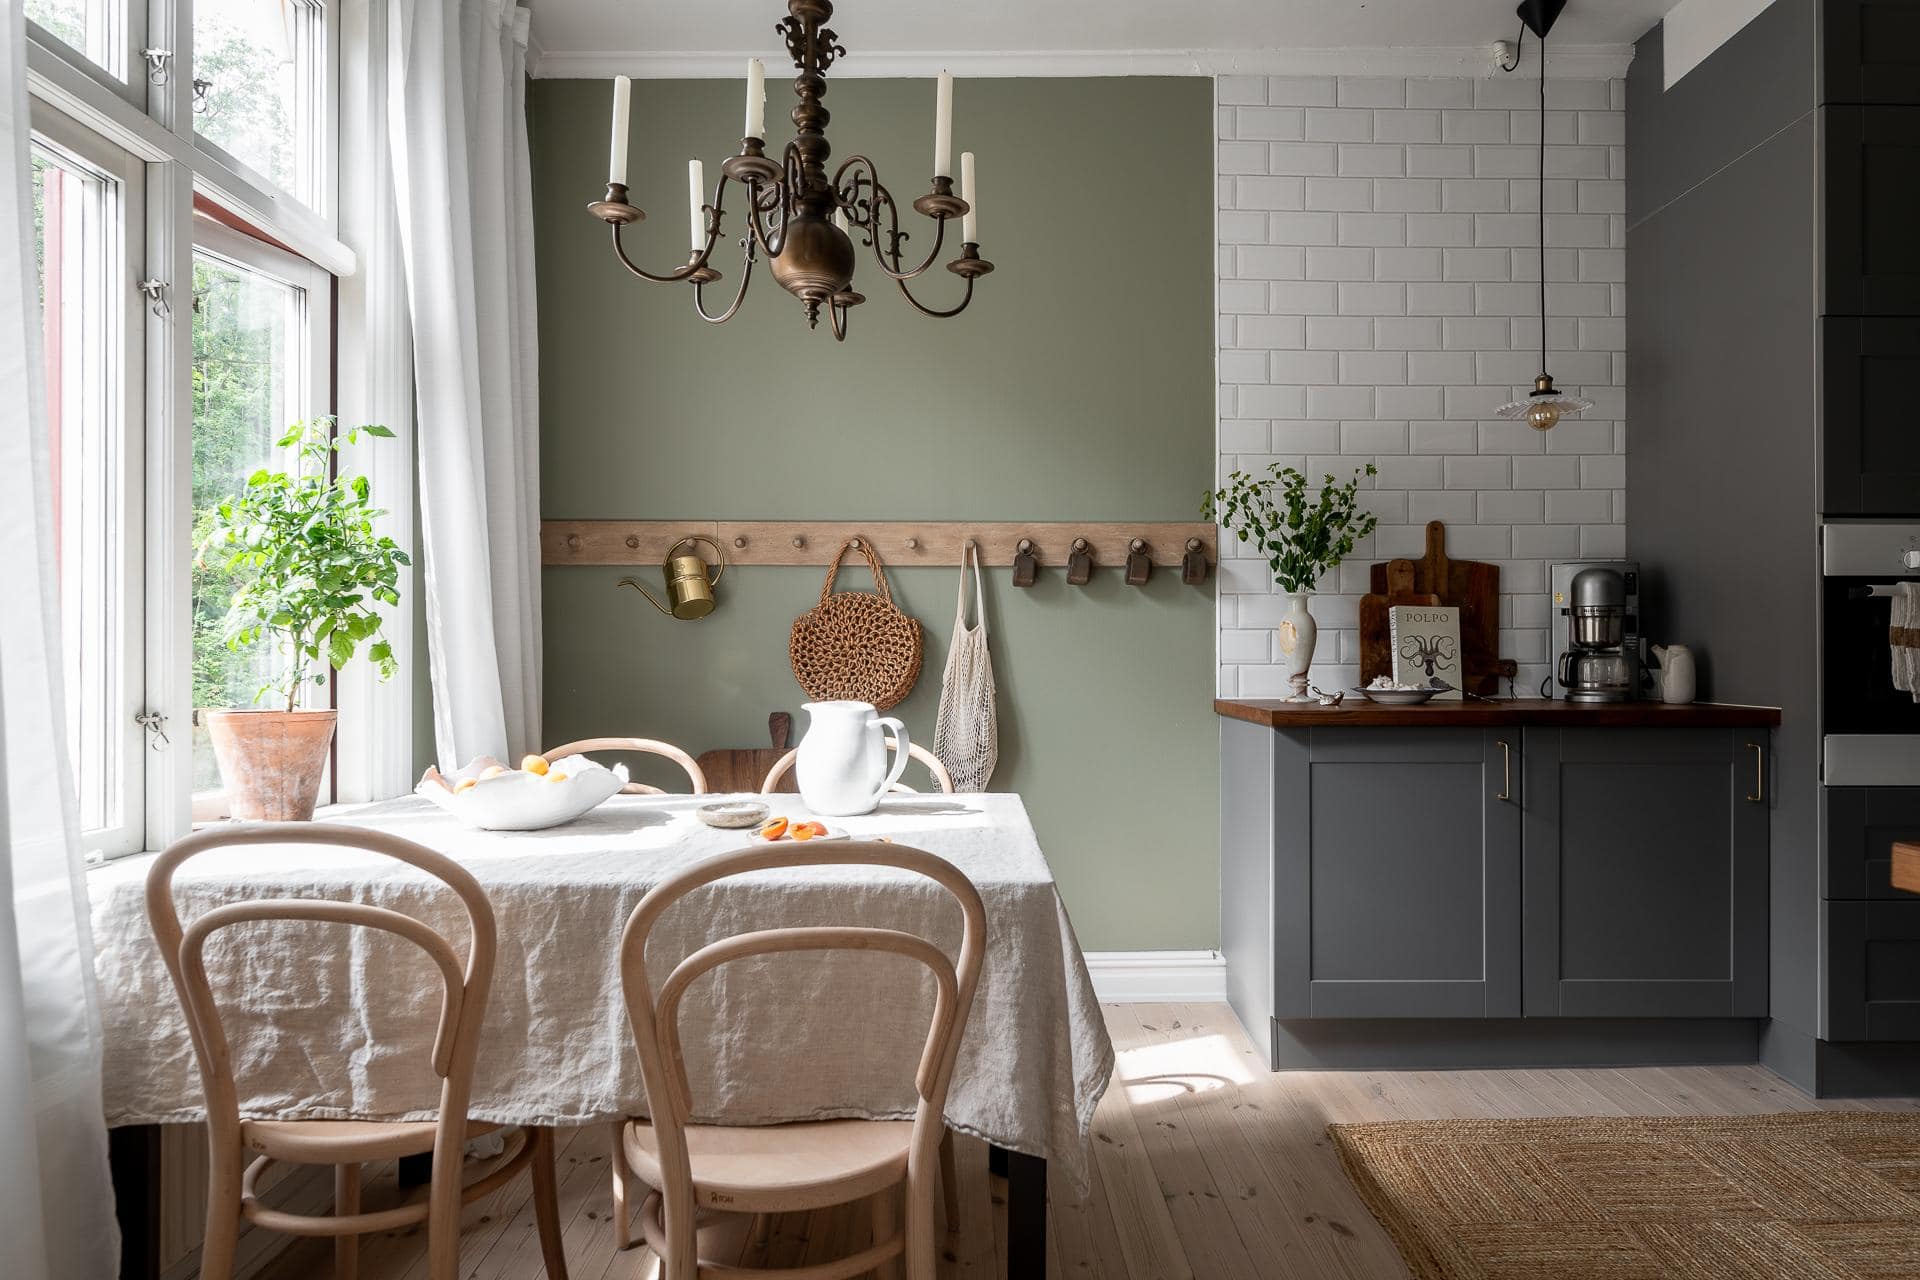 Grey kitchen cabinets against sage green walls in an attic